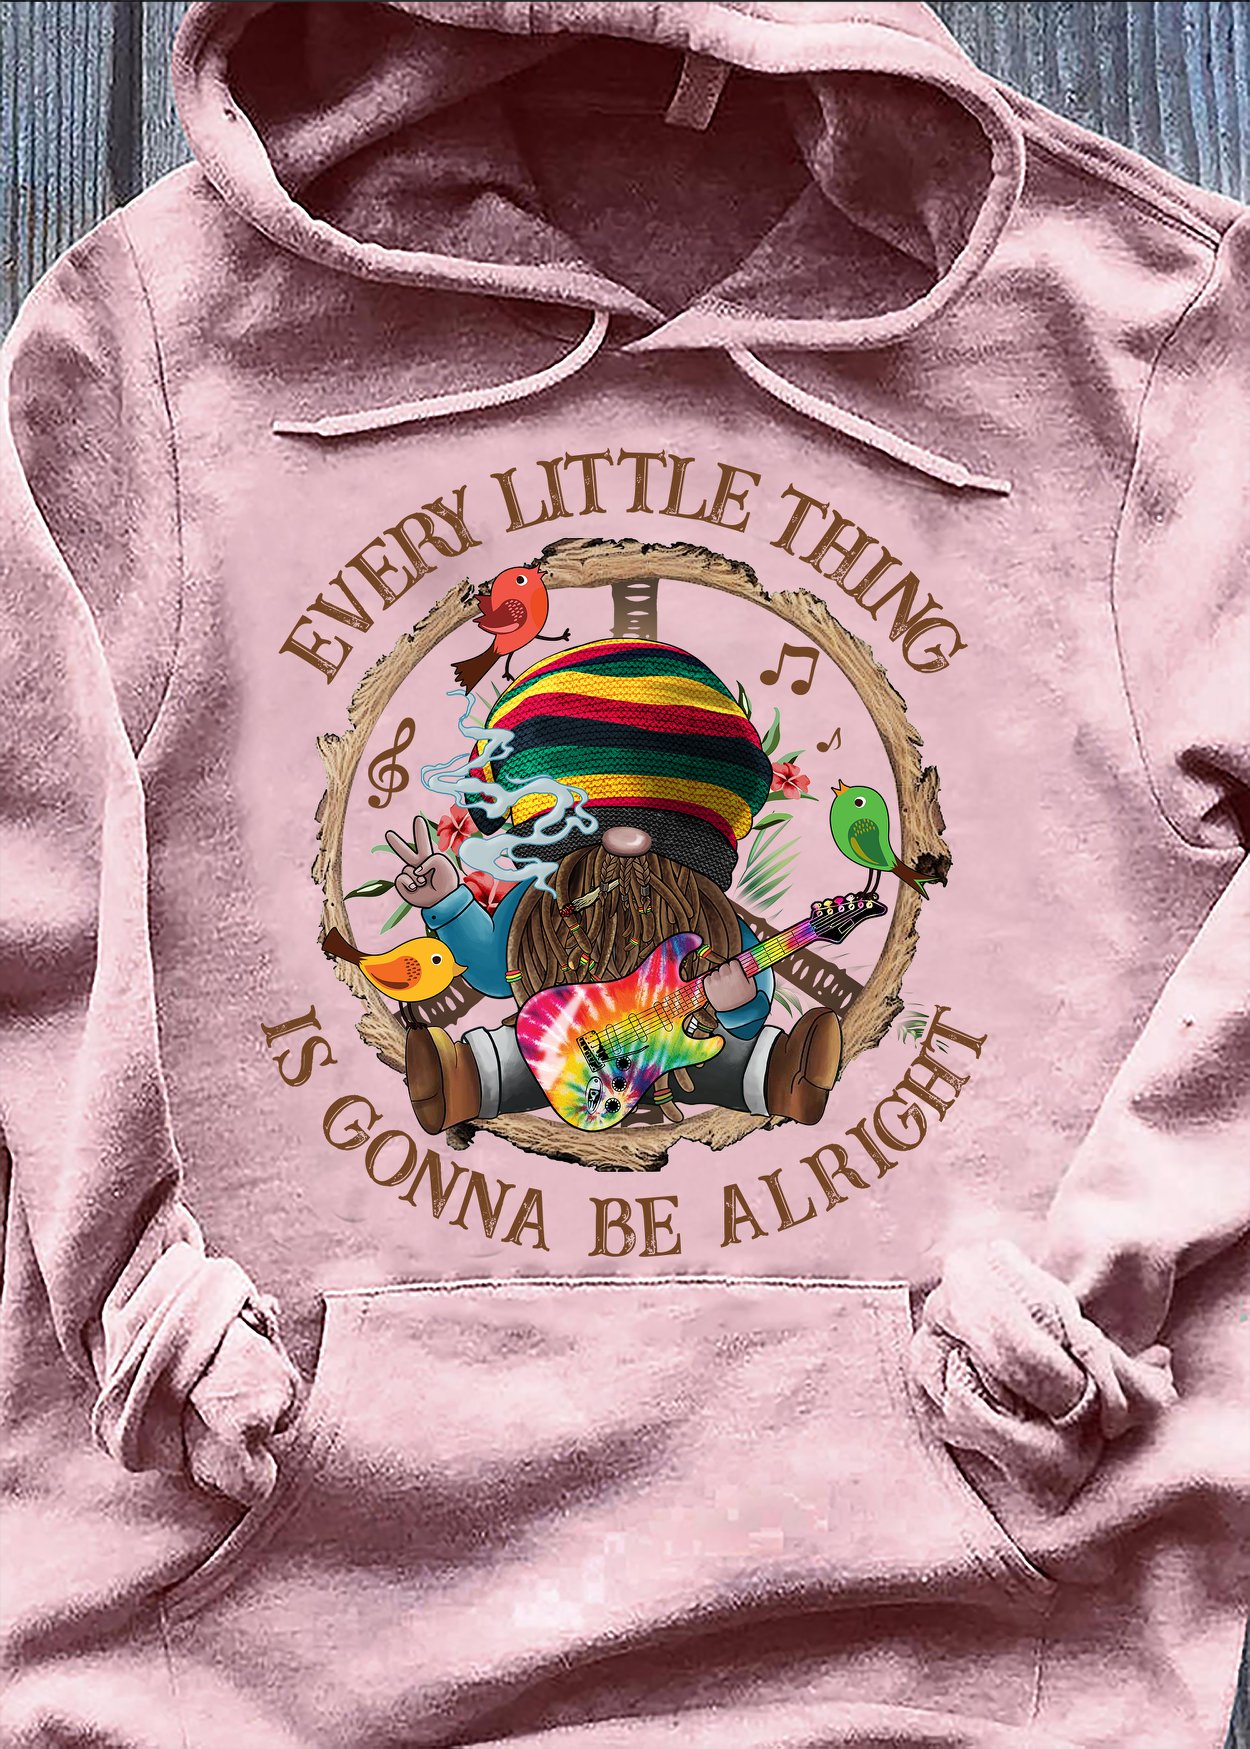 Every little thing is gonna be alright - Garden gnome, love playing guitar